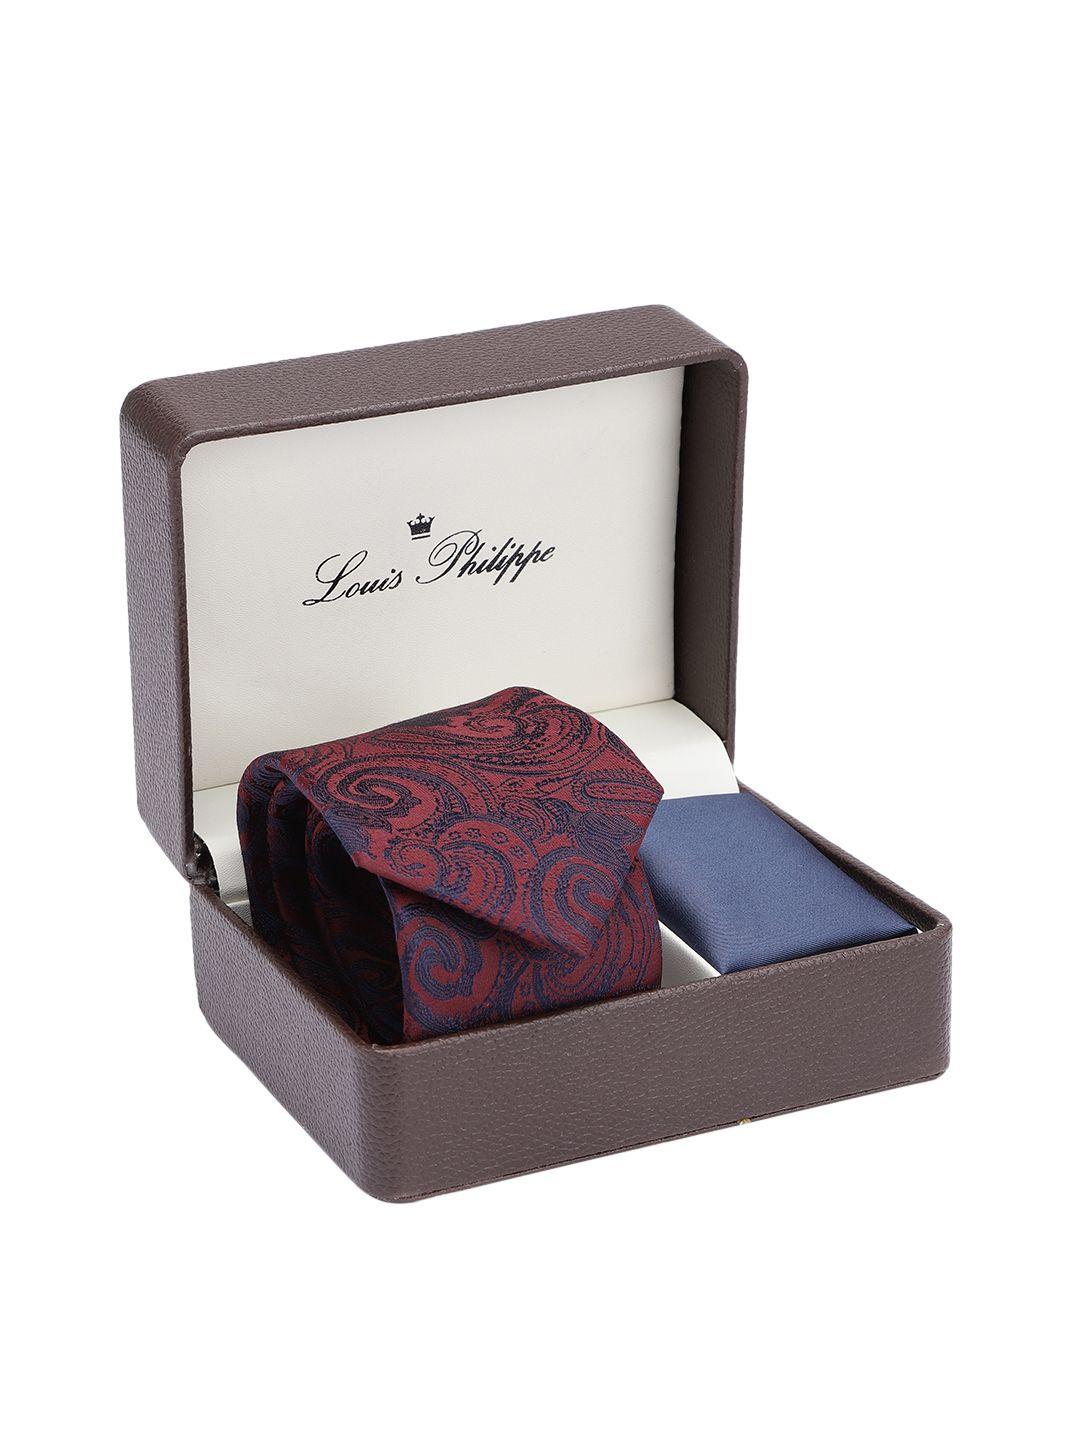 louis philippe men maroon printed accessory gift set